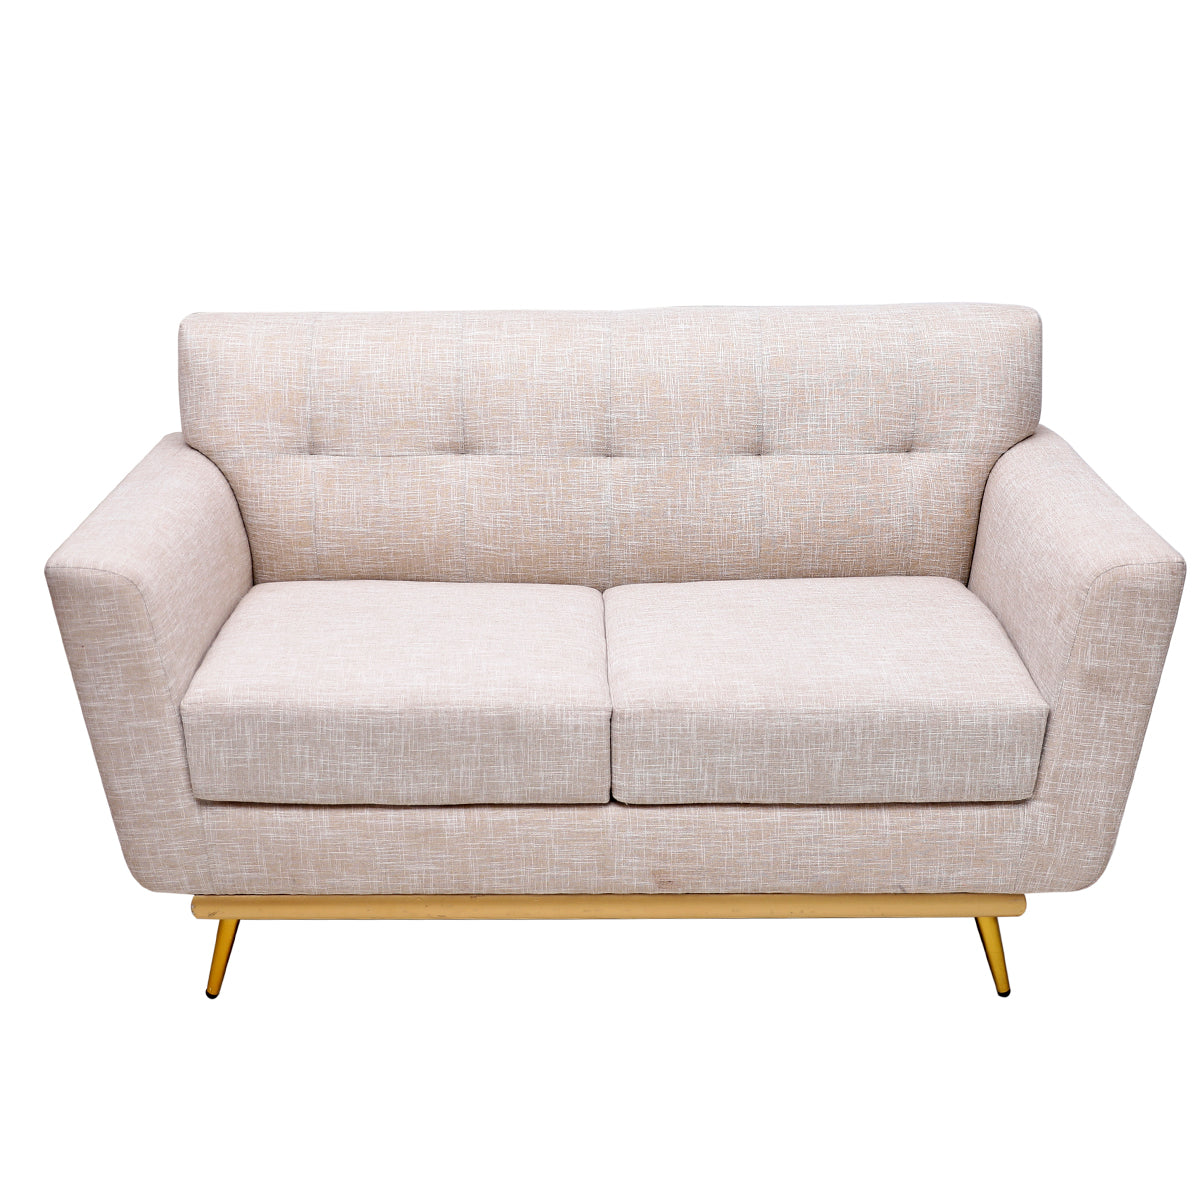 Rochester Sofa Set & Honey Comb Coffee Table + Gift Card Worth 15,000/-